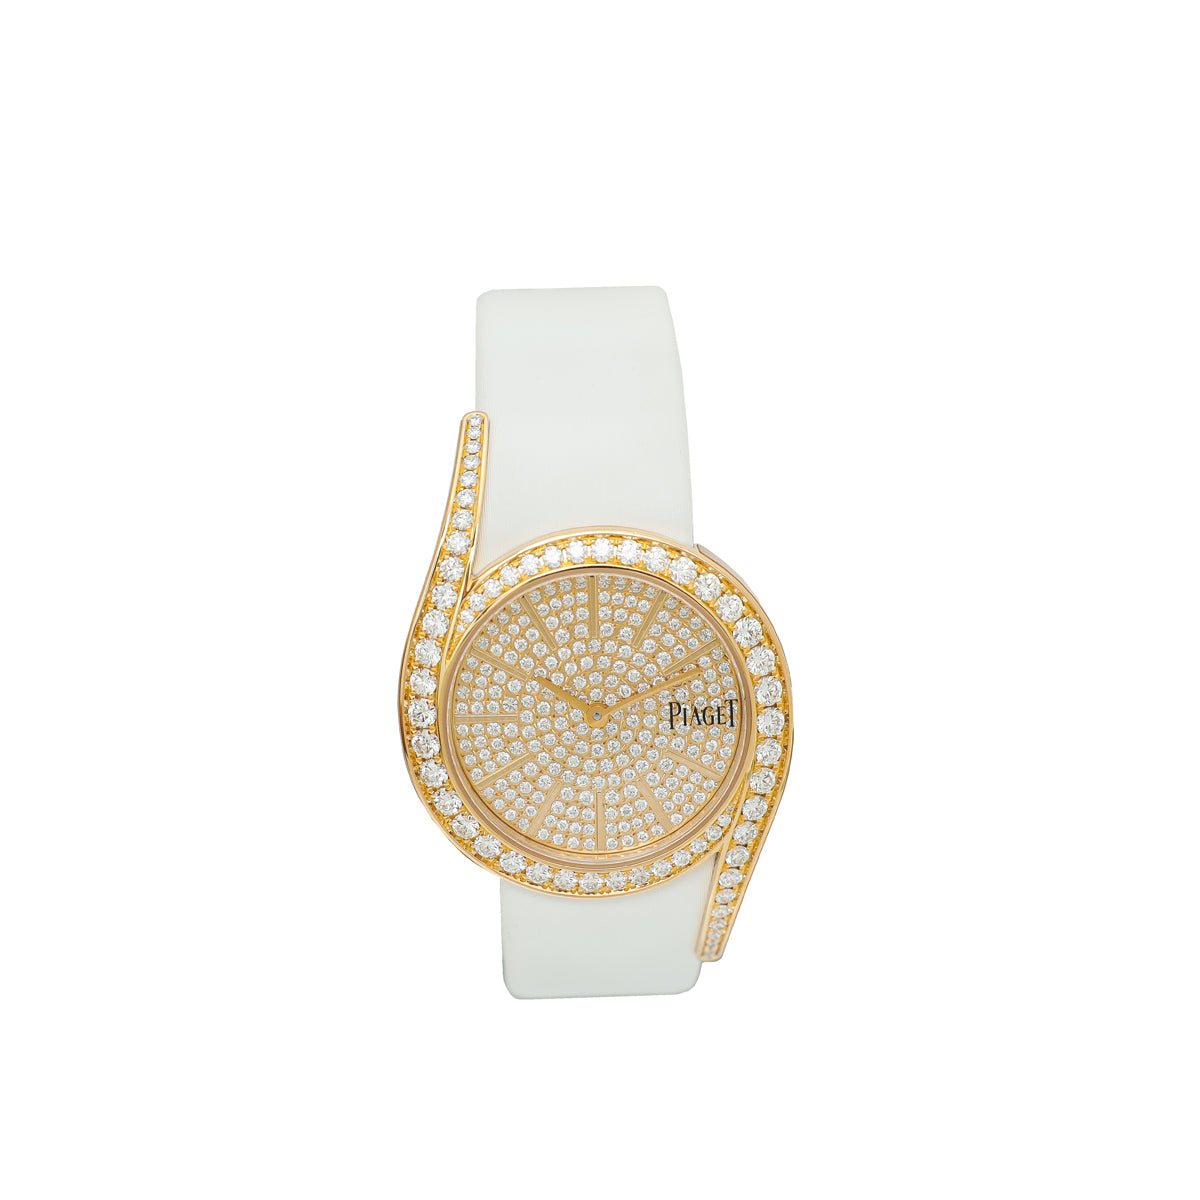 Load image into Gallery viewer, Piaget 18K Rose Gold Diamond Limelight Gala 32mm Quartz Watch
